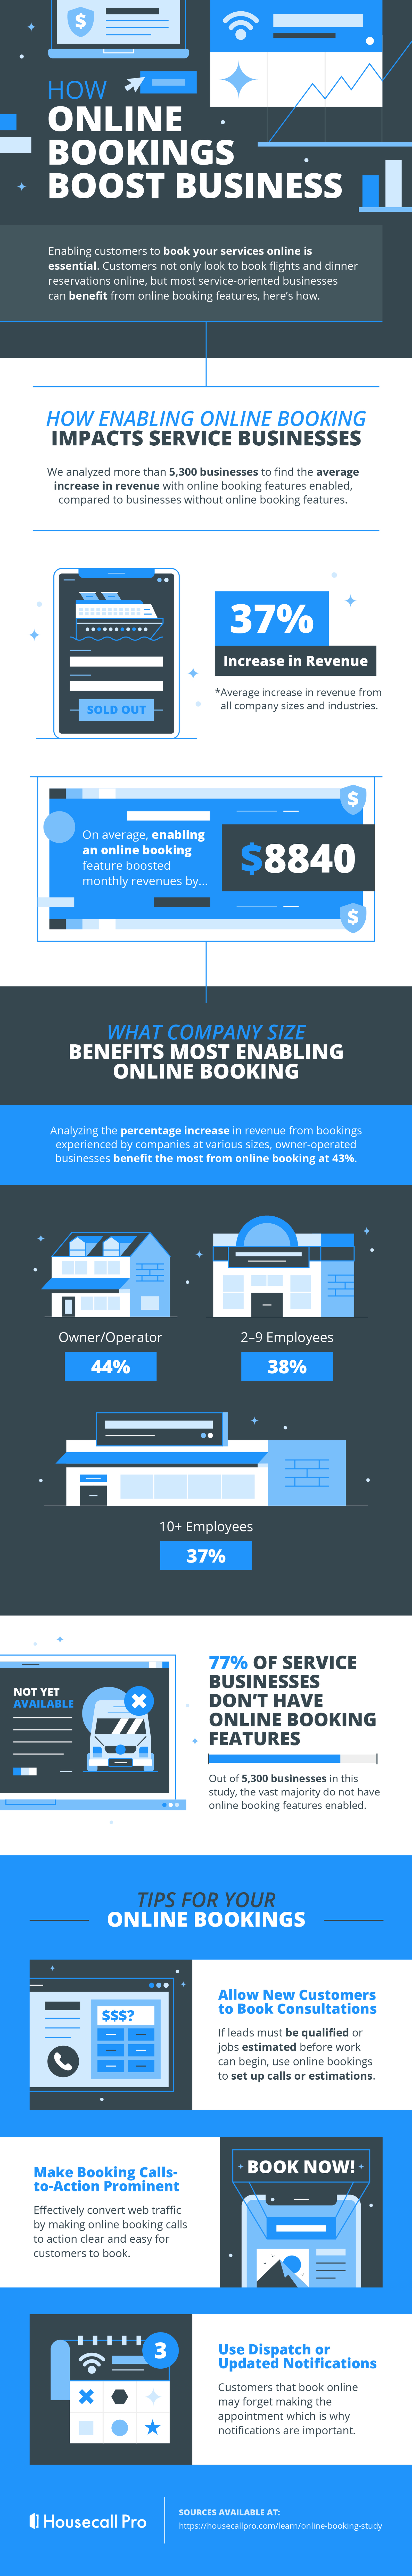 full visual with statistics related to online booking features for business